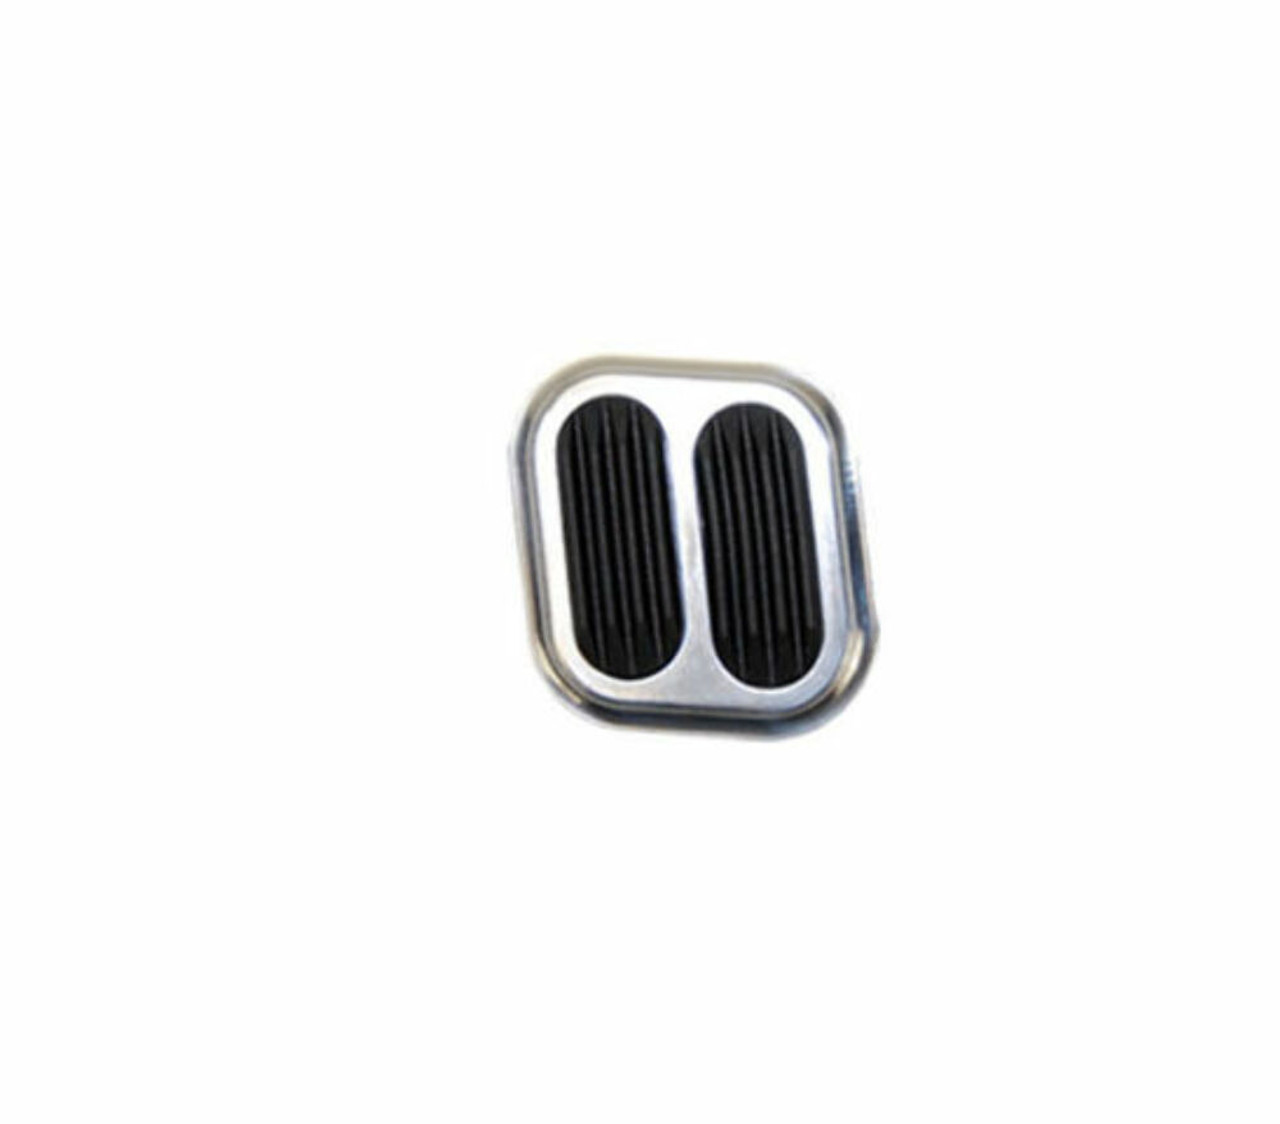 Polished Aluminum Street Rod Dimmer Pad W/Rubber